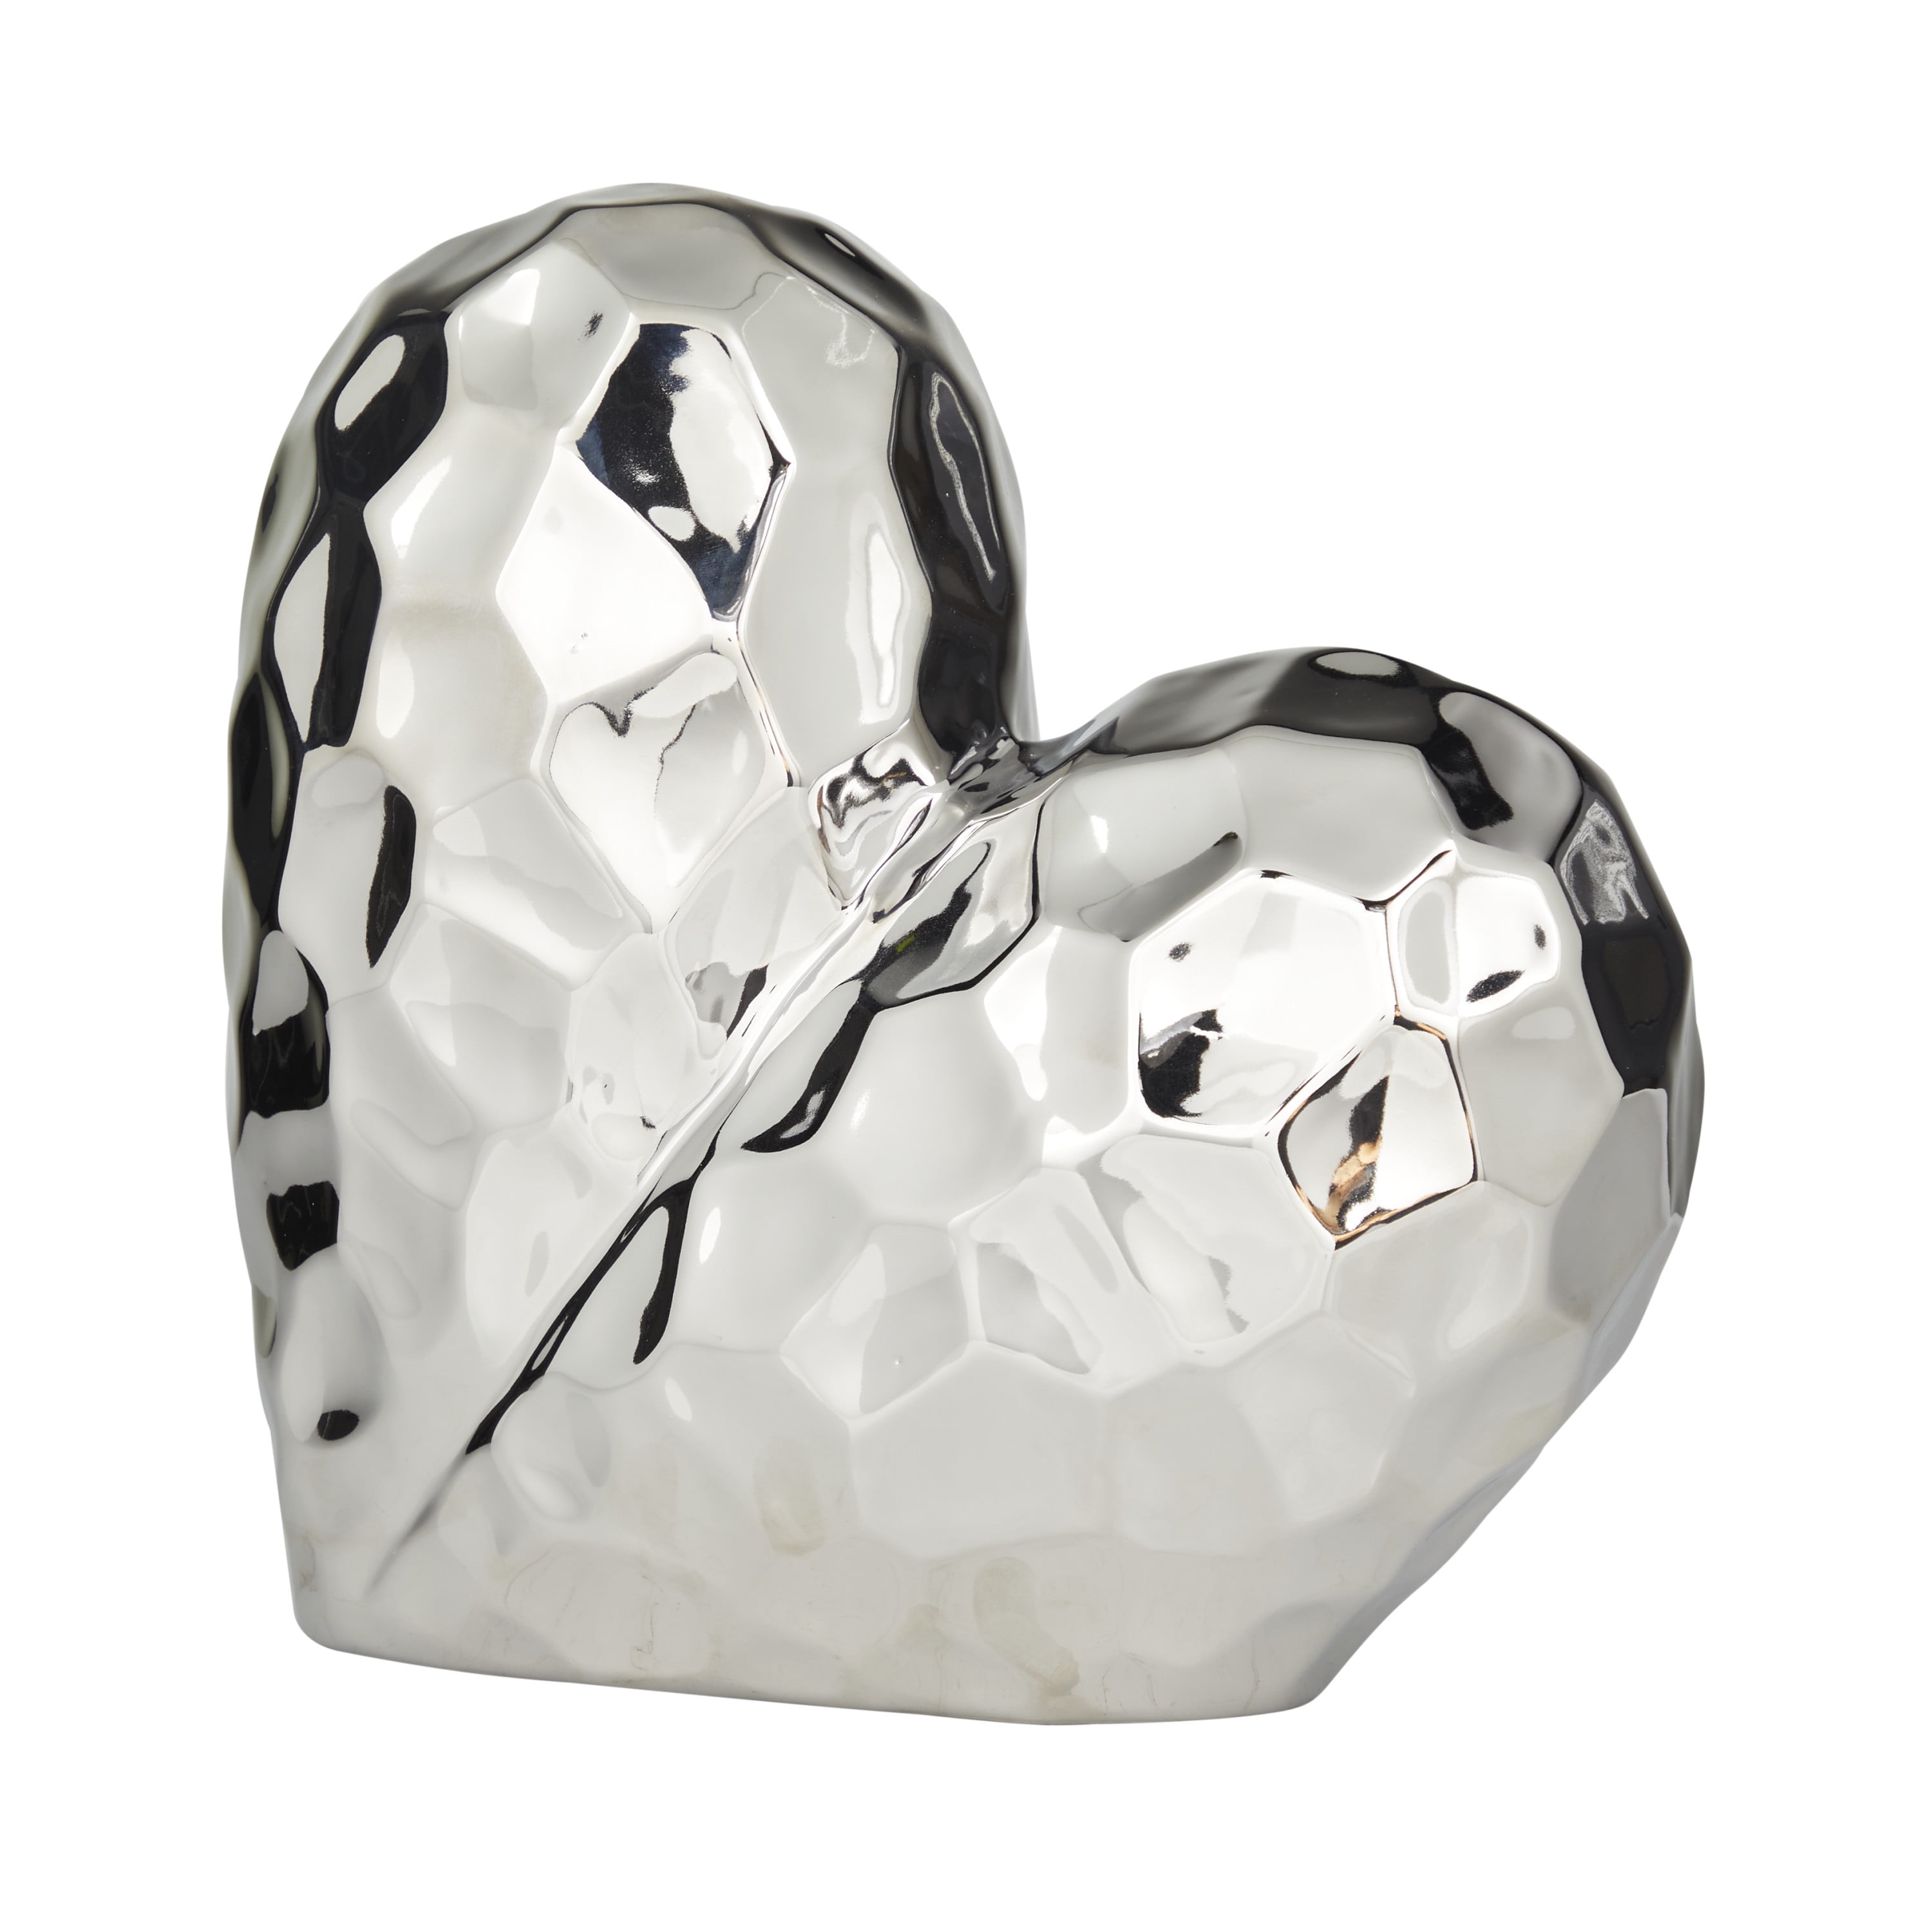 Silver Porcelain Dimensional Angled Origami Inspired Heart Sculpture